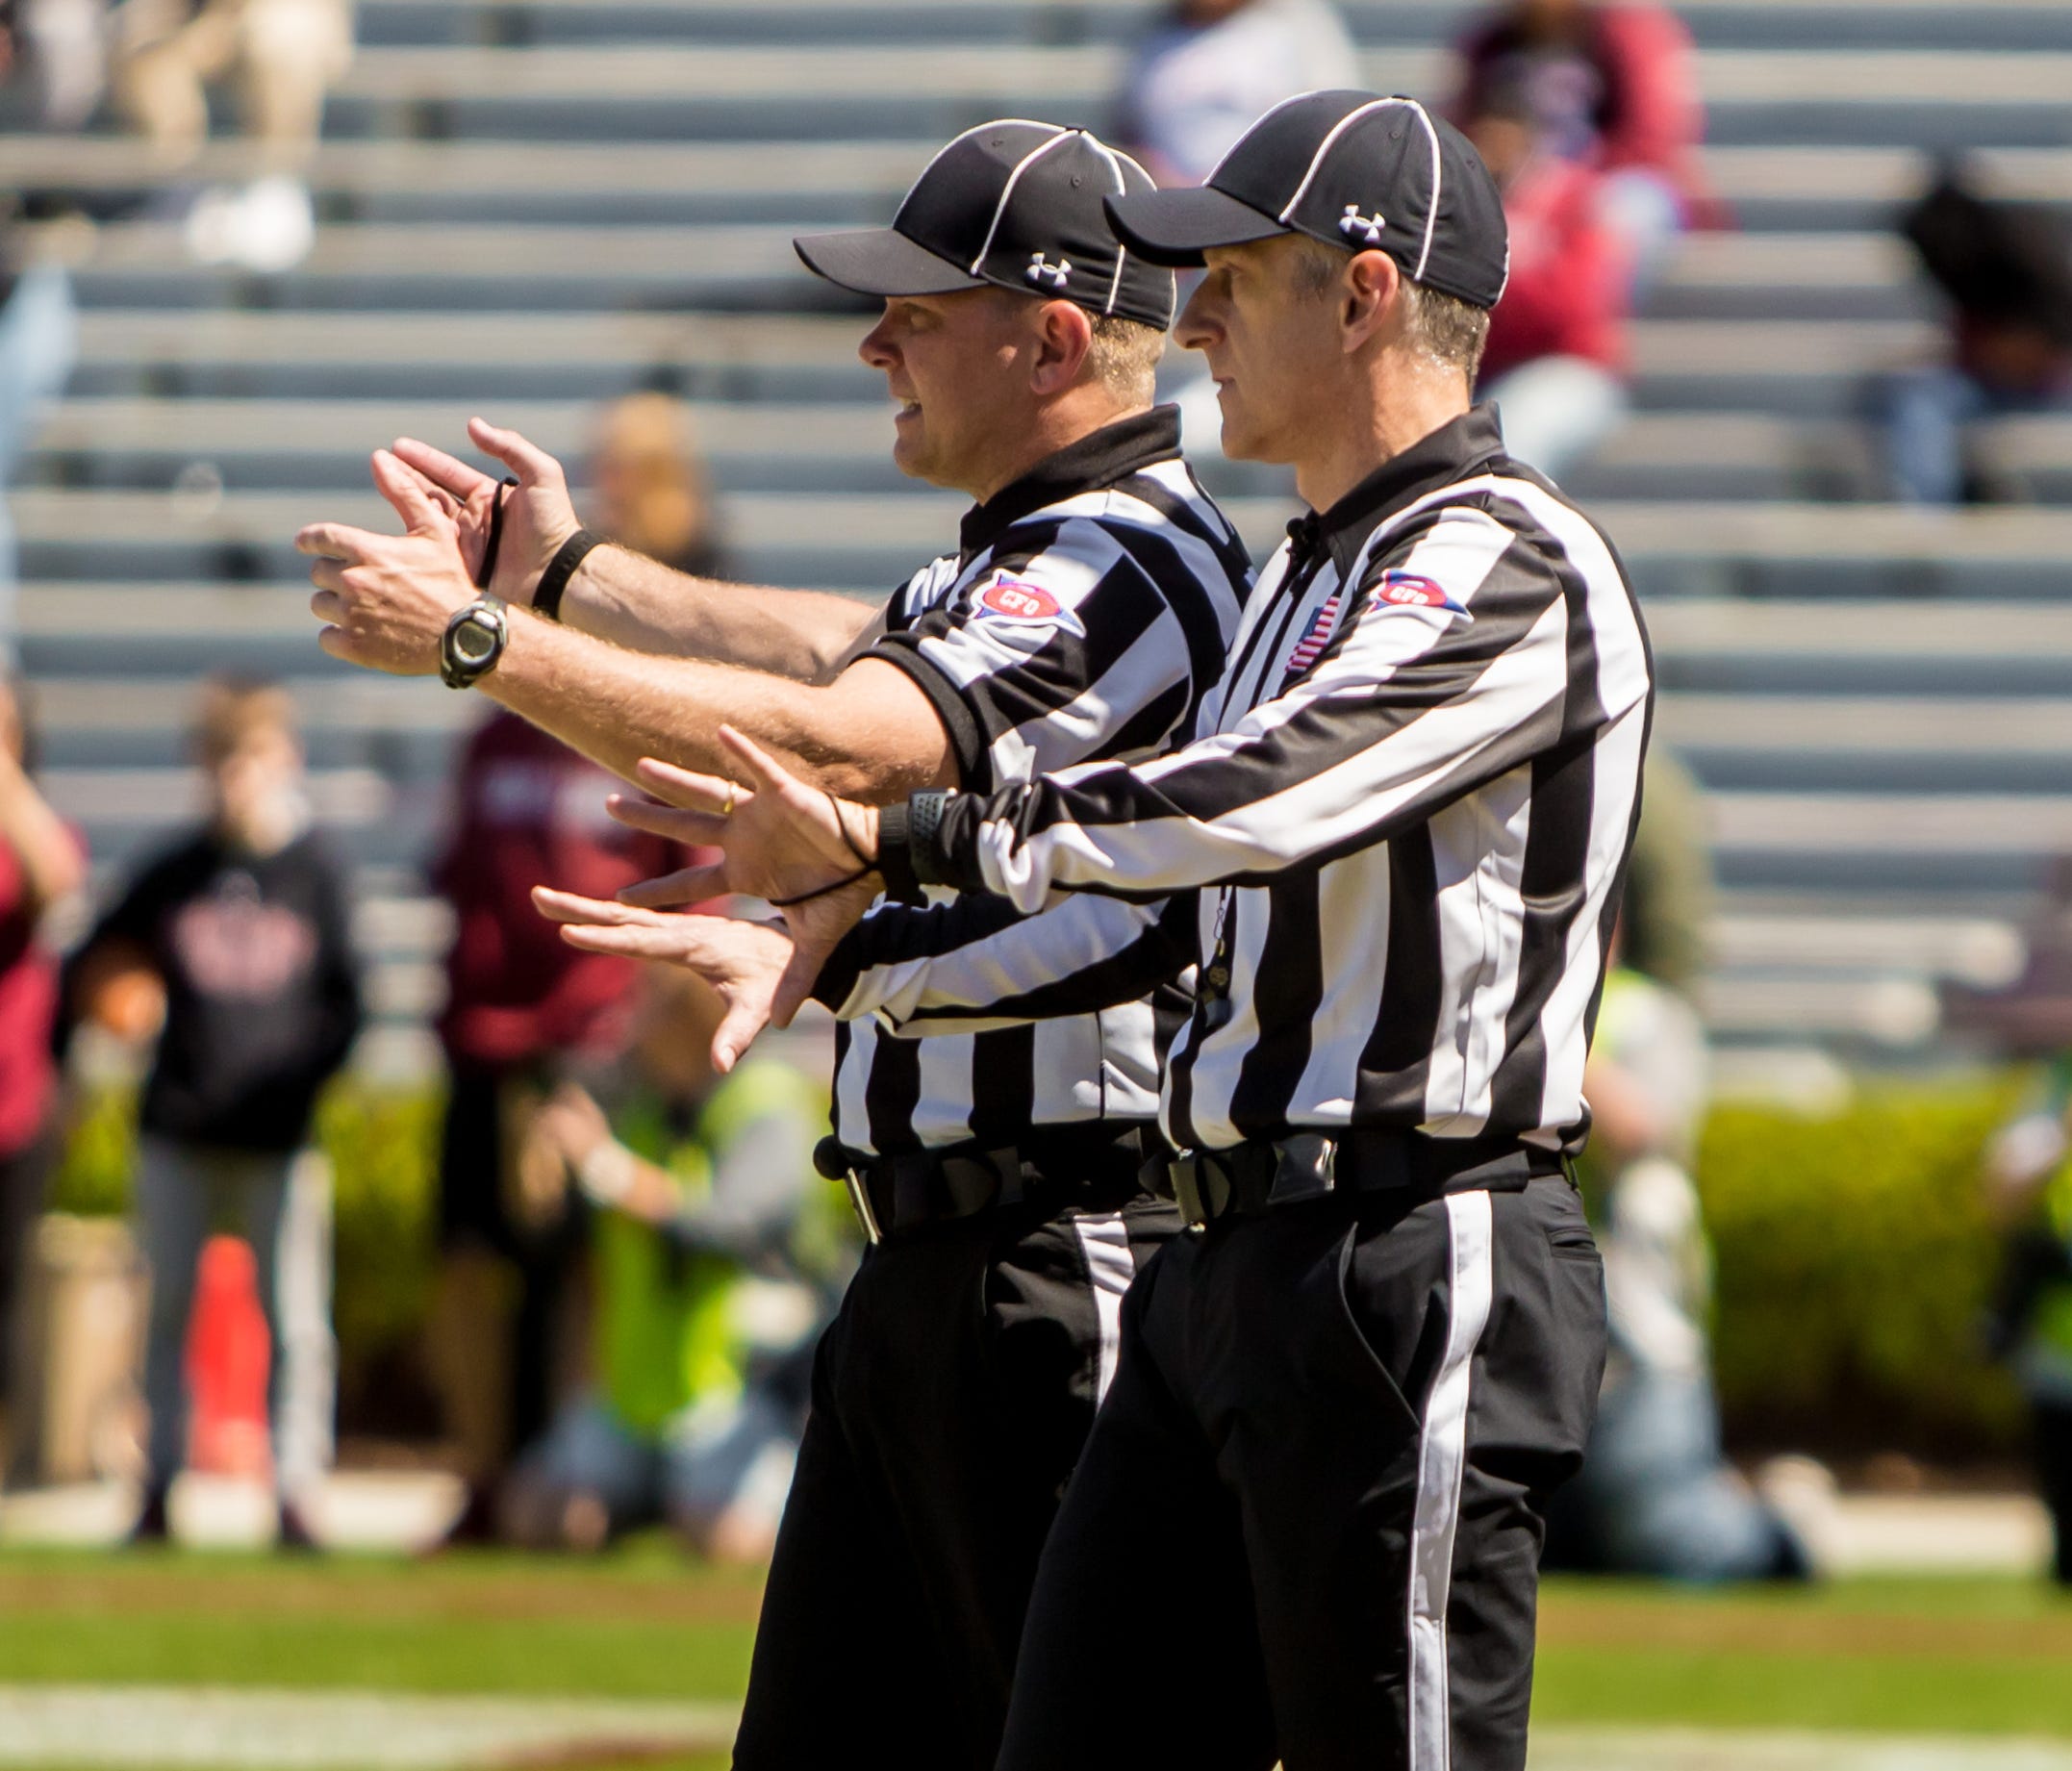 USA TODAY college football writer George Schroeder, right, shadows back judge Jimmy Russell.